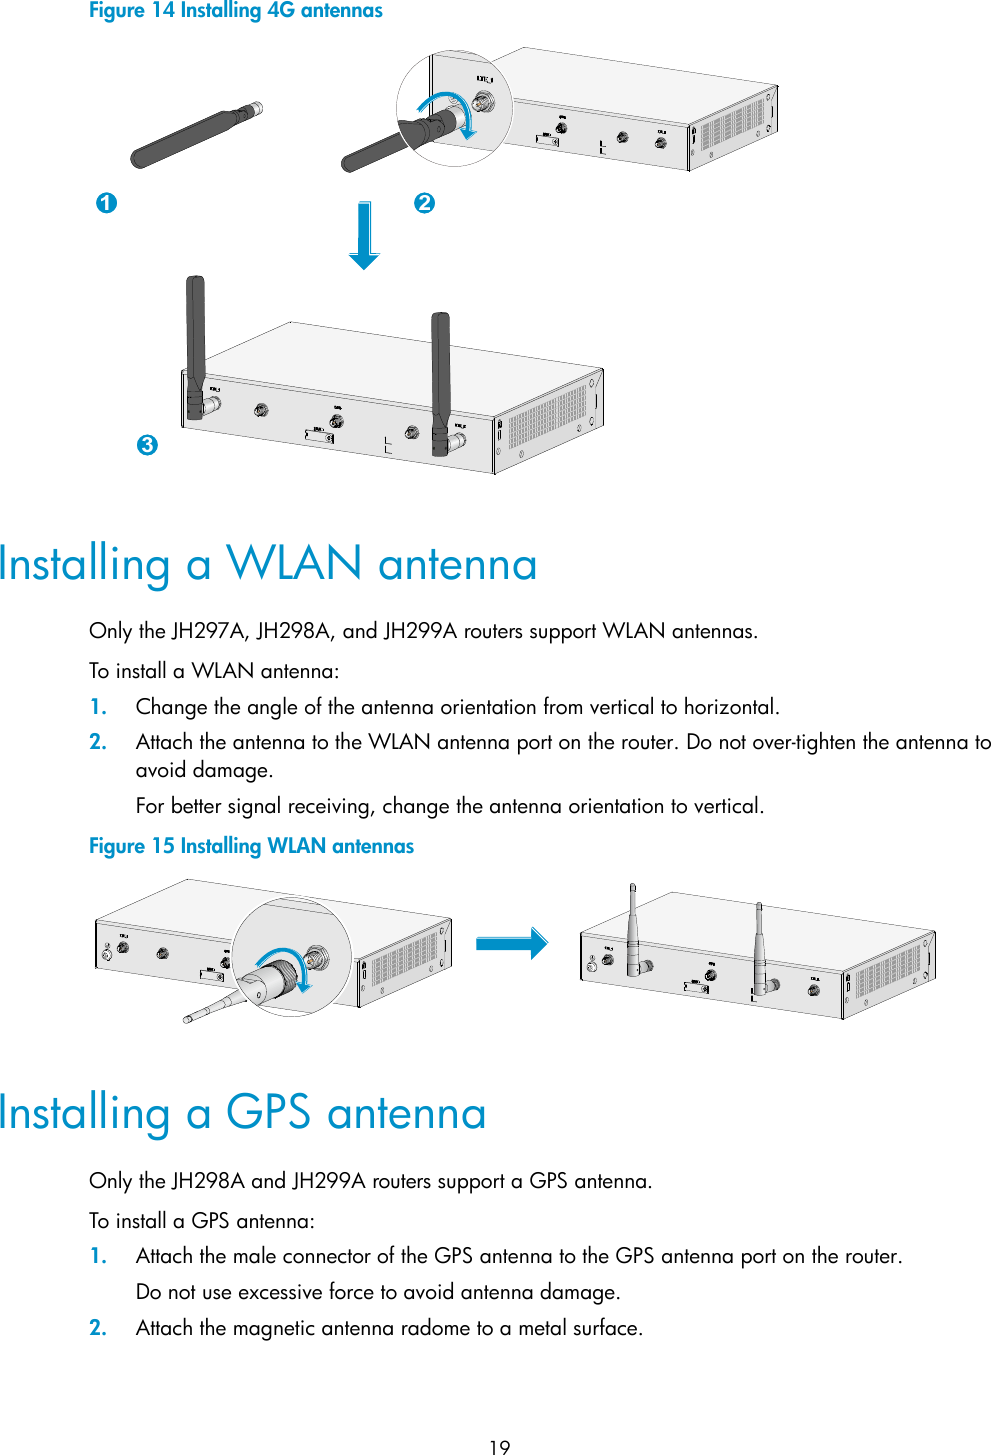  19 Figure 14 Installing 4G antennas   Installing a WLAN antenna Only the JH297A, JH298A, and JH299A routers support WLAN antennas. To install a WLAN antenna: 1. Change the angle of the antenna orientation from vertical to horizontal. 2. Attach the antenna to the WLAN antenna port on the router. Do not over-tighten the antenna to avoid damage. For better signal receiving, change the antenna orientation to vertical. Figure 15 Installing WLAN antennas   Installing a GPS antenna Only the JH298A and JH299A routers support a GPS antenna. To install a GPS antenna: 1. Attach the male connector of the GPS antenna to the GPS antenna port on the router. Do not use excessive force to avoid antenna damage. 2. Attach the magnetic antenna radome to a metal surface. 